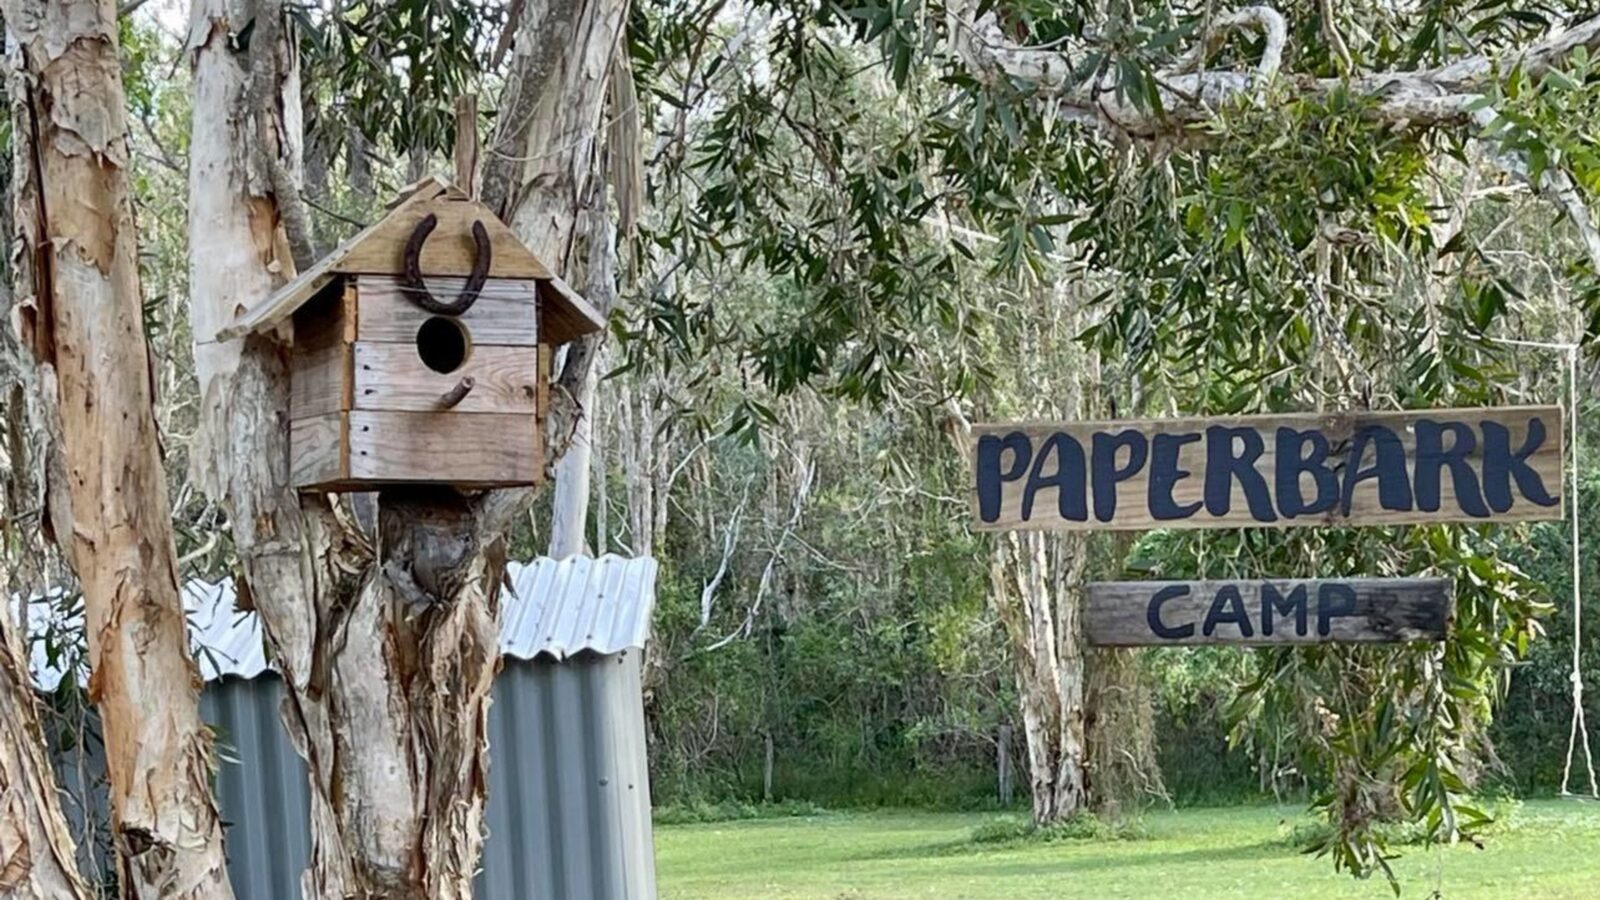 WELCOME TO PAPERBARK CAMP!